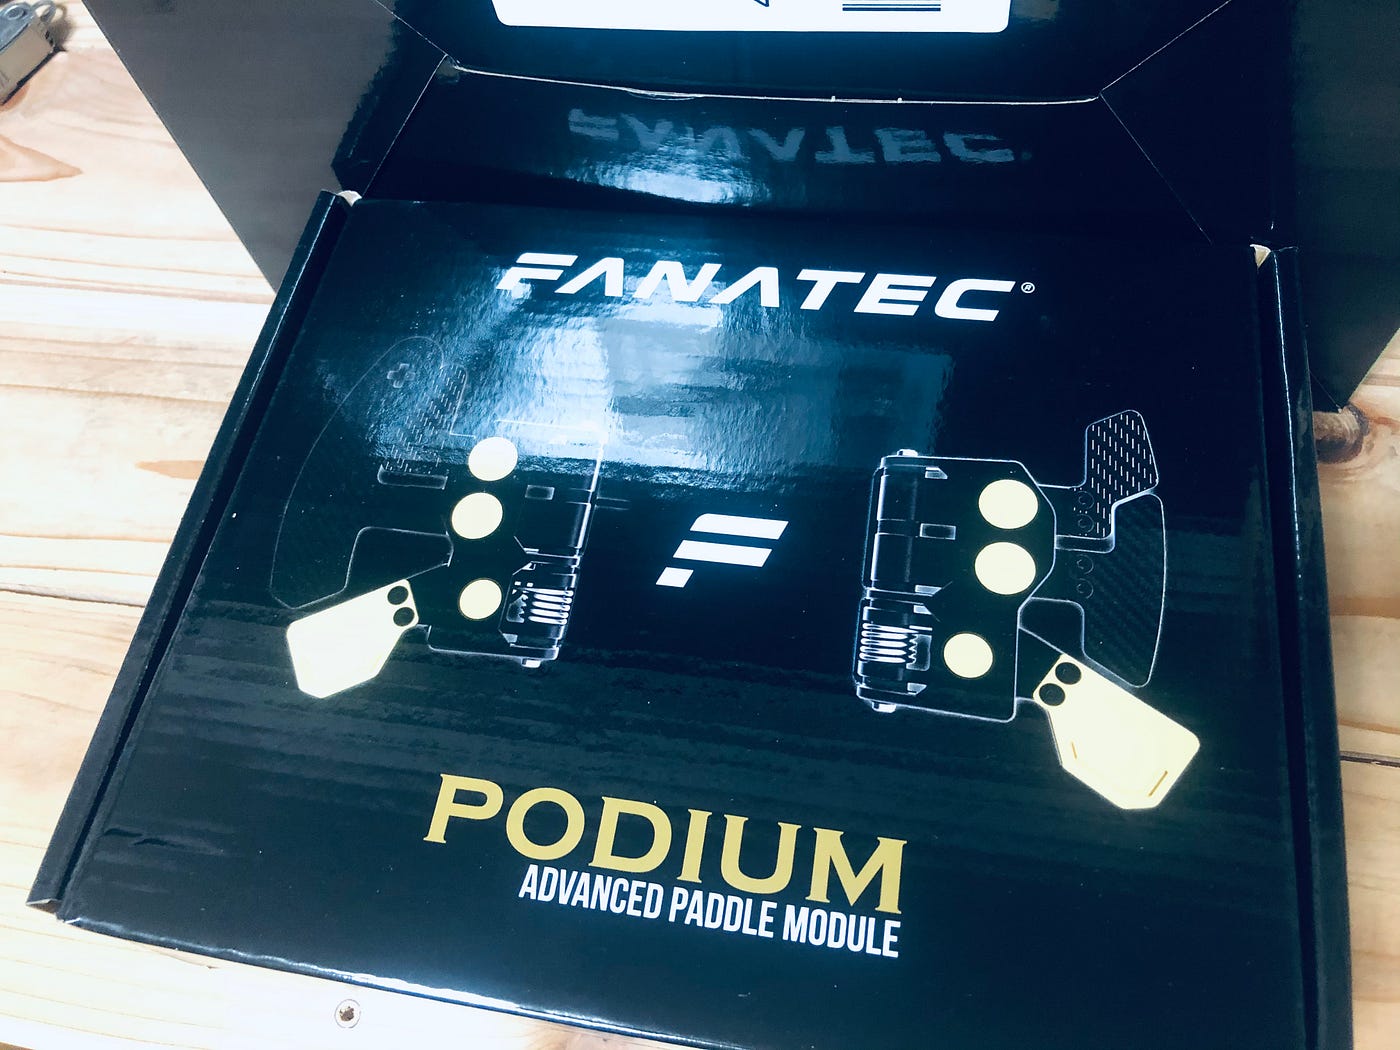 The FANATEC Podium Advanced Paddle Module review (Attached to the